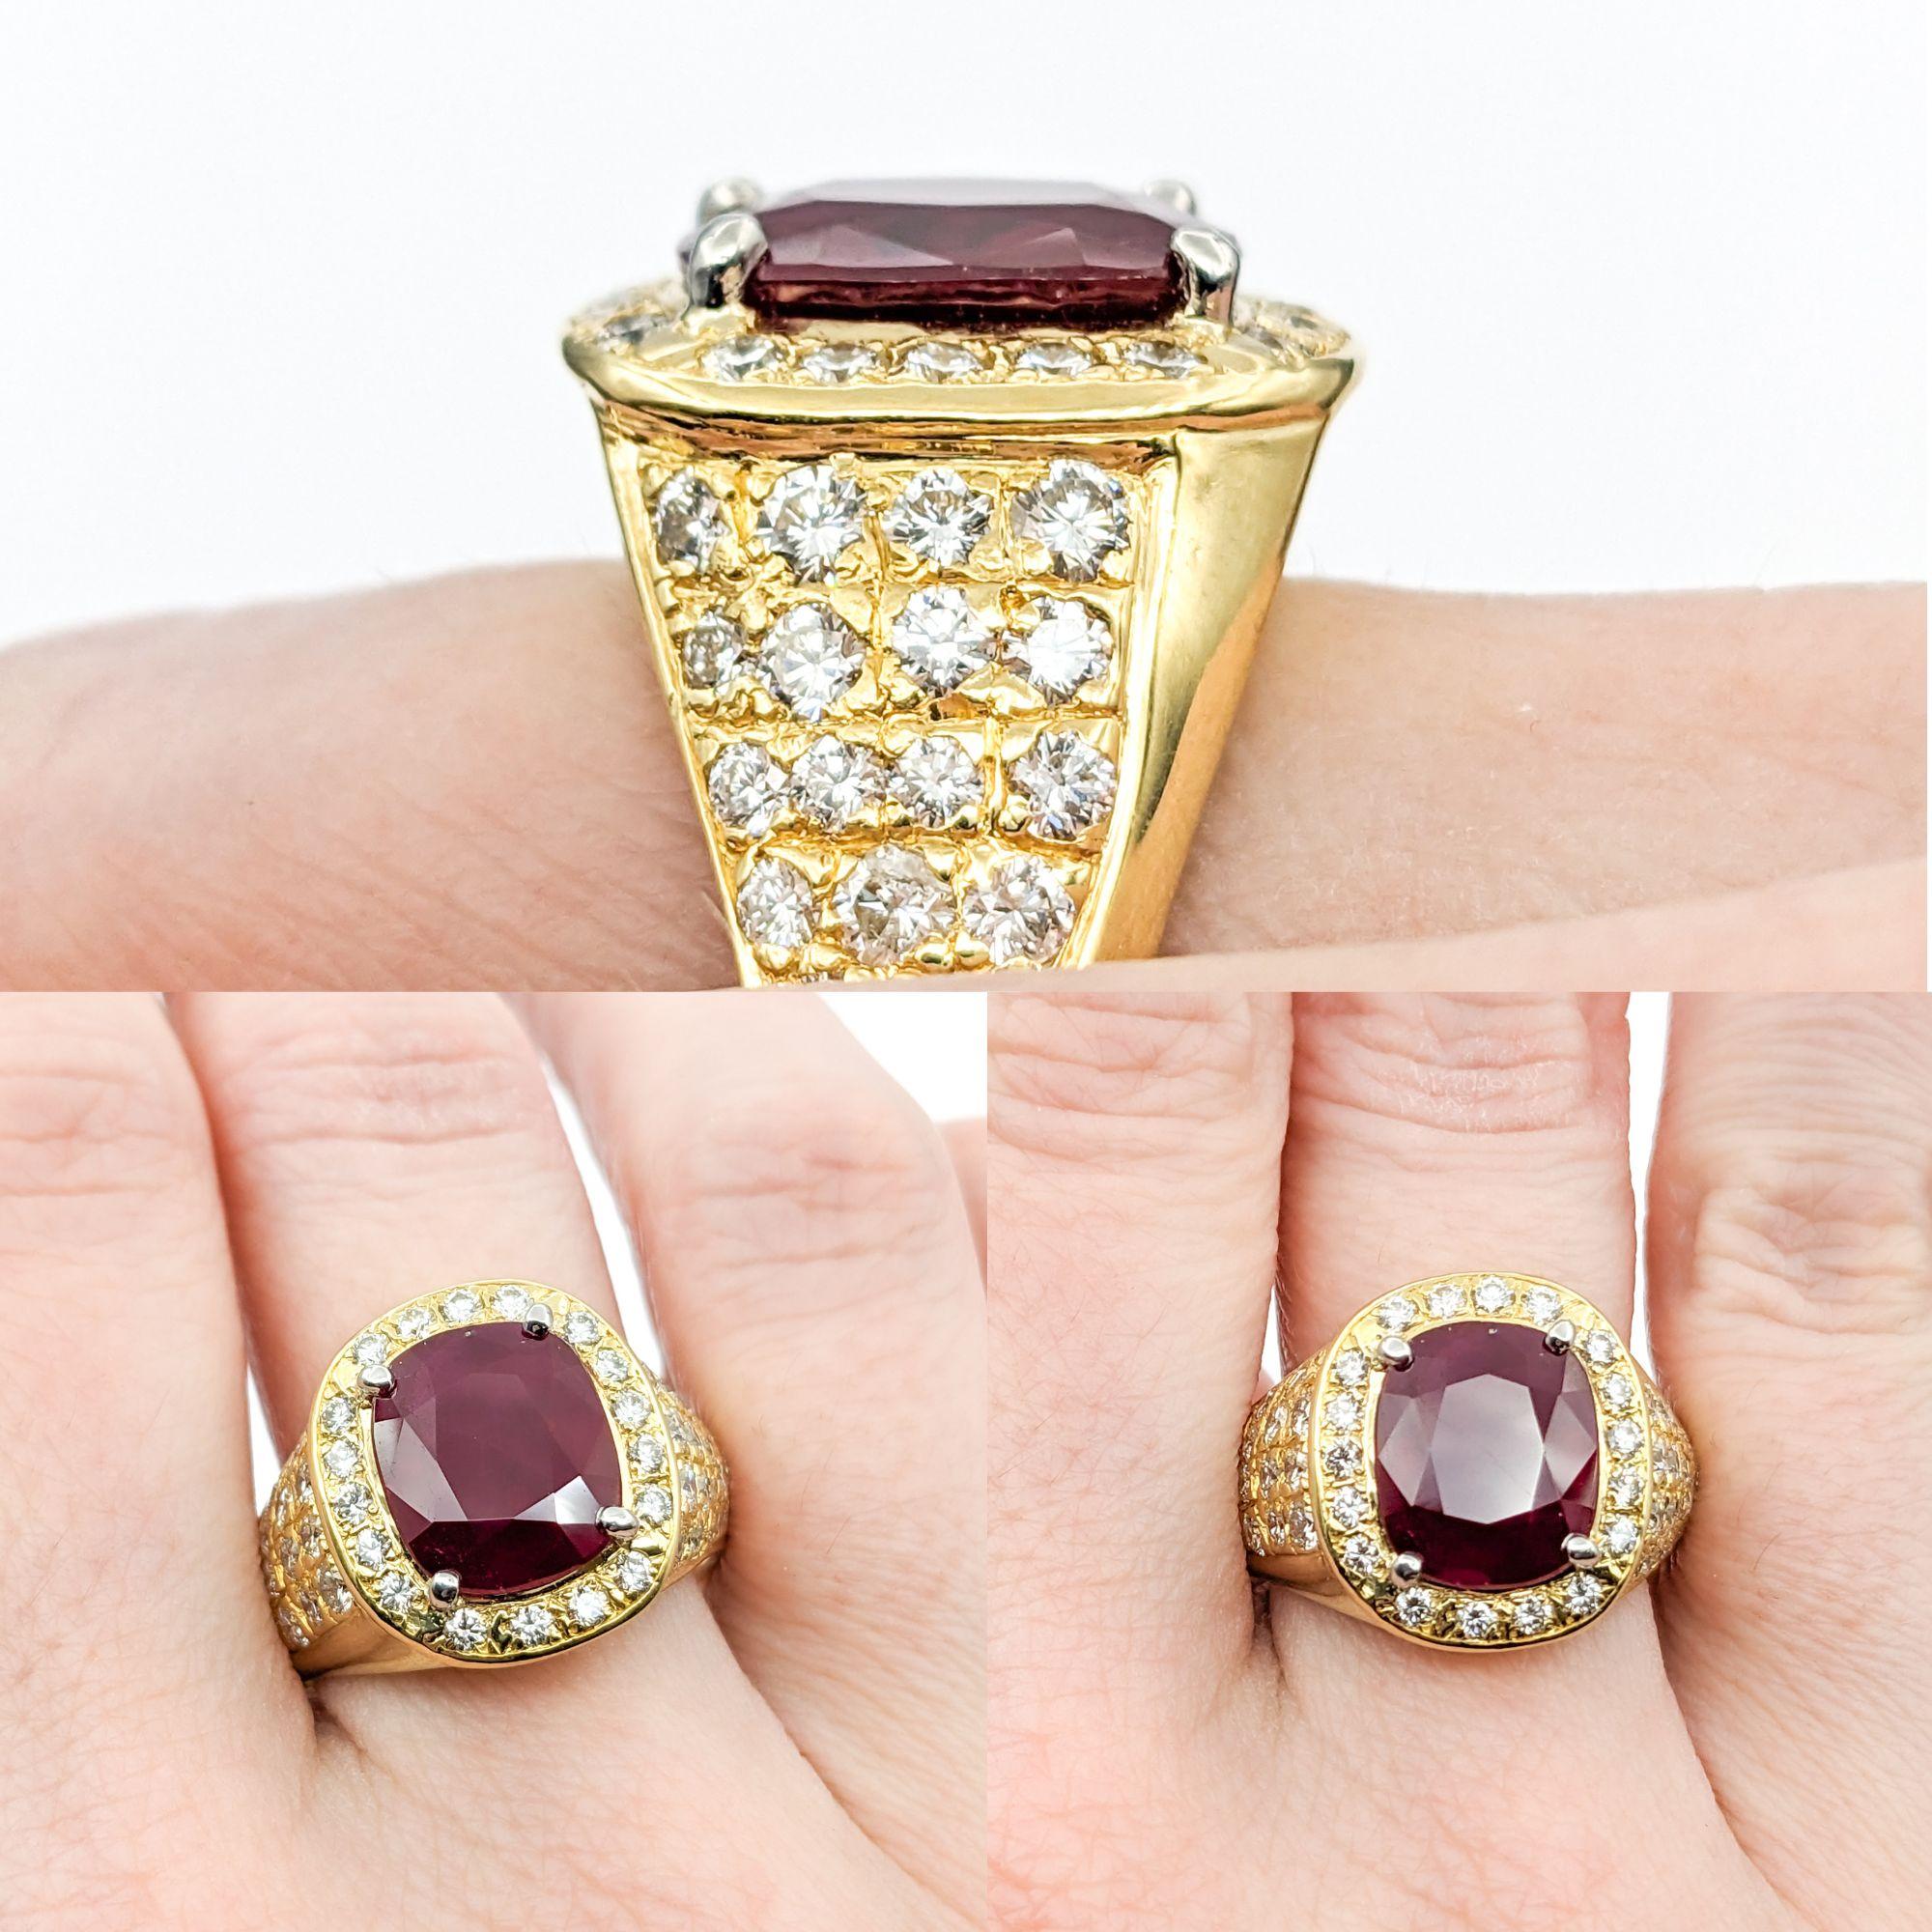 GIA Cerified 5.87ct Heat-only Burmese Ruby & 1.50ctw Diamonds Ring In Yellow Gold

This exquisite ring is masterfully crafted in 18kt yellow gold, featuring a remarkable 5.87ct GIA certified, heat-only Burmese ruby as its centerpiece. Encircling